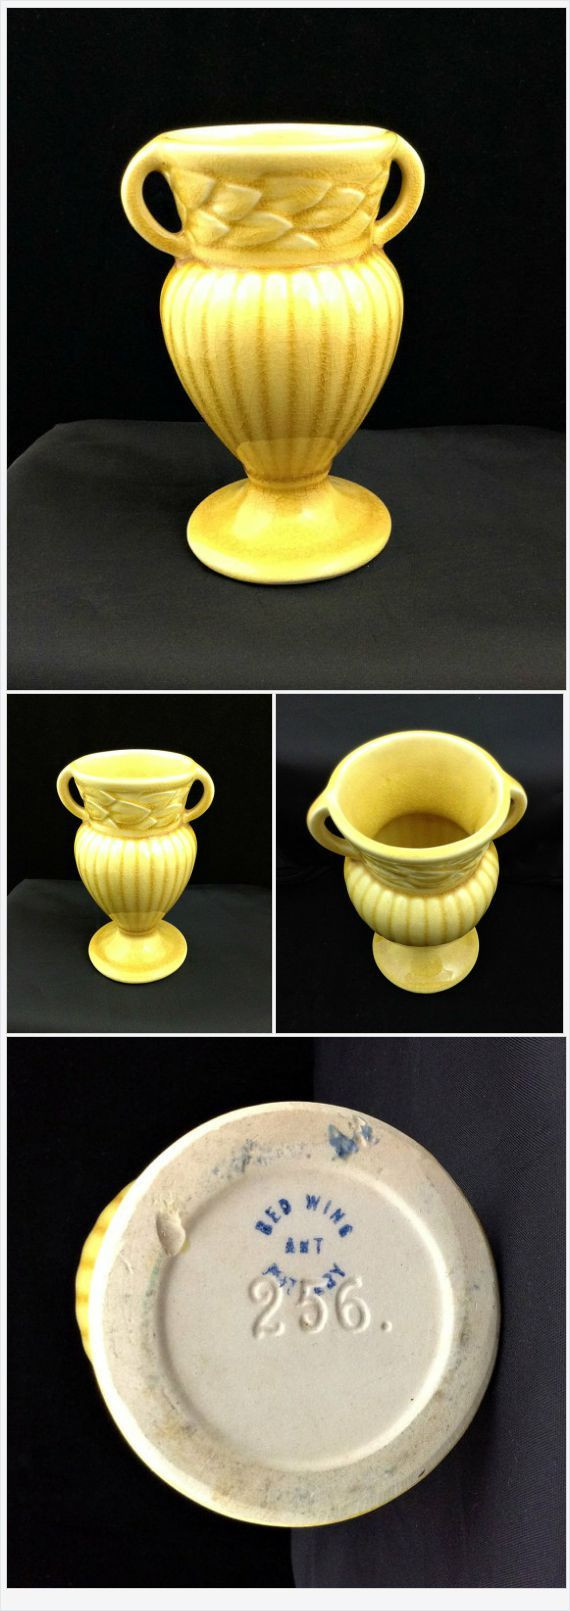 23 Stylish Red Wing Pottery Vase 2024 free download red wing pottery vase of red wing art pottery gloss yellow pedestal footed vase shape no 256 with red wing art pottery gloss yellow pedestal footed vase shape no 256 vintage